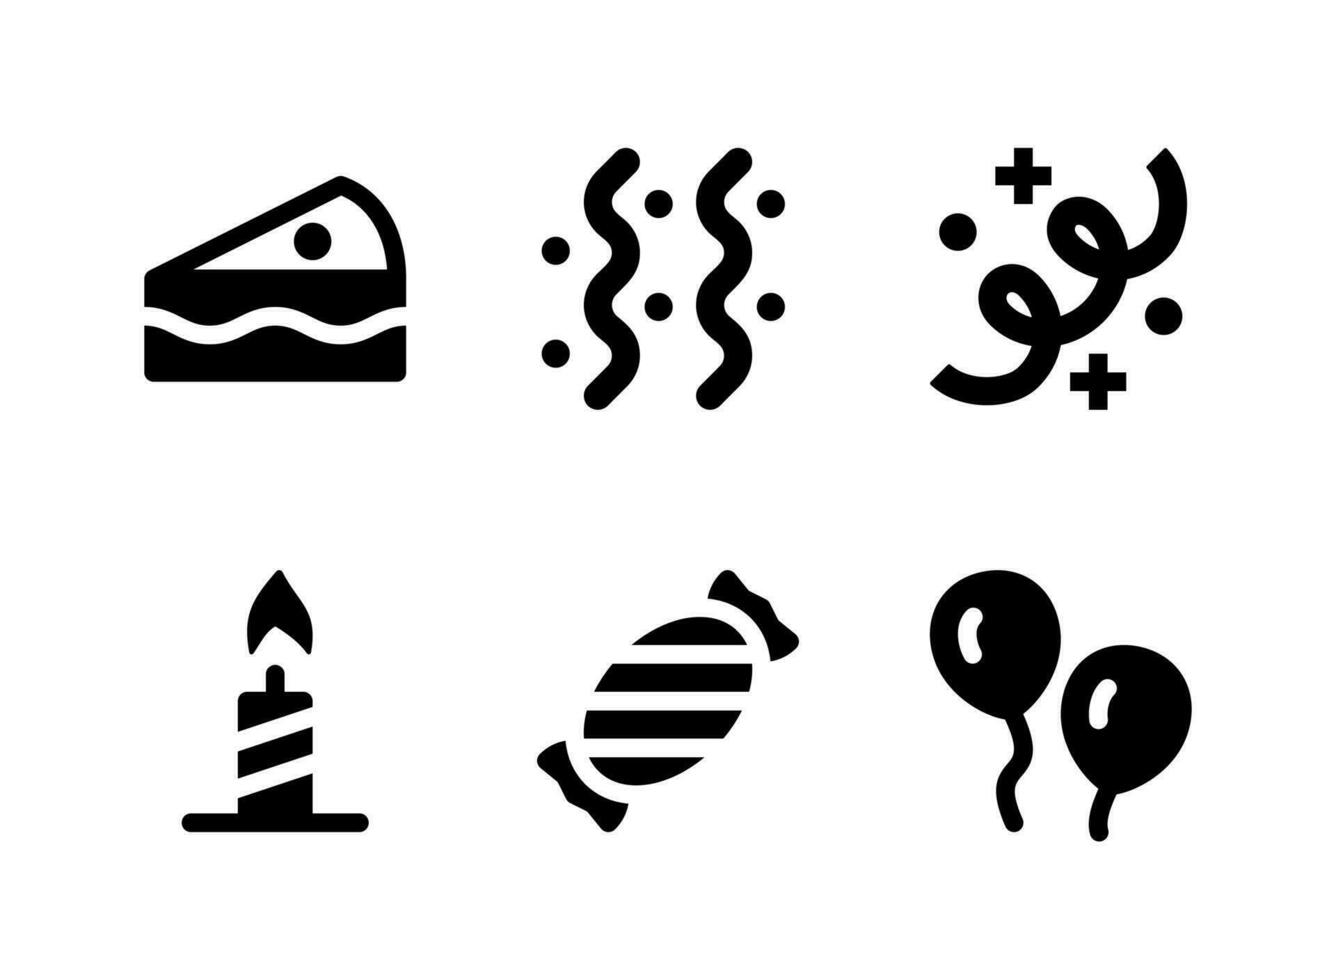 Simple Set of Birthday Related Vector Solid Icons. Contains Icons as Streamers, Candle, Candy, Balloon and more.